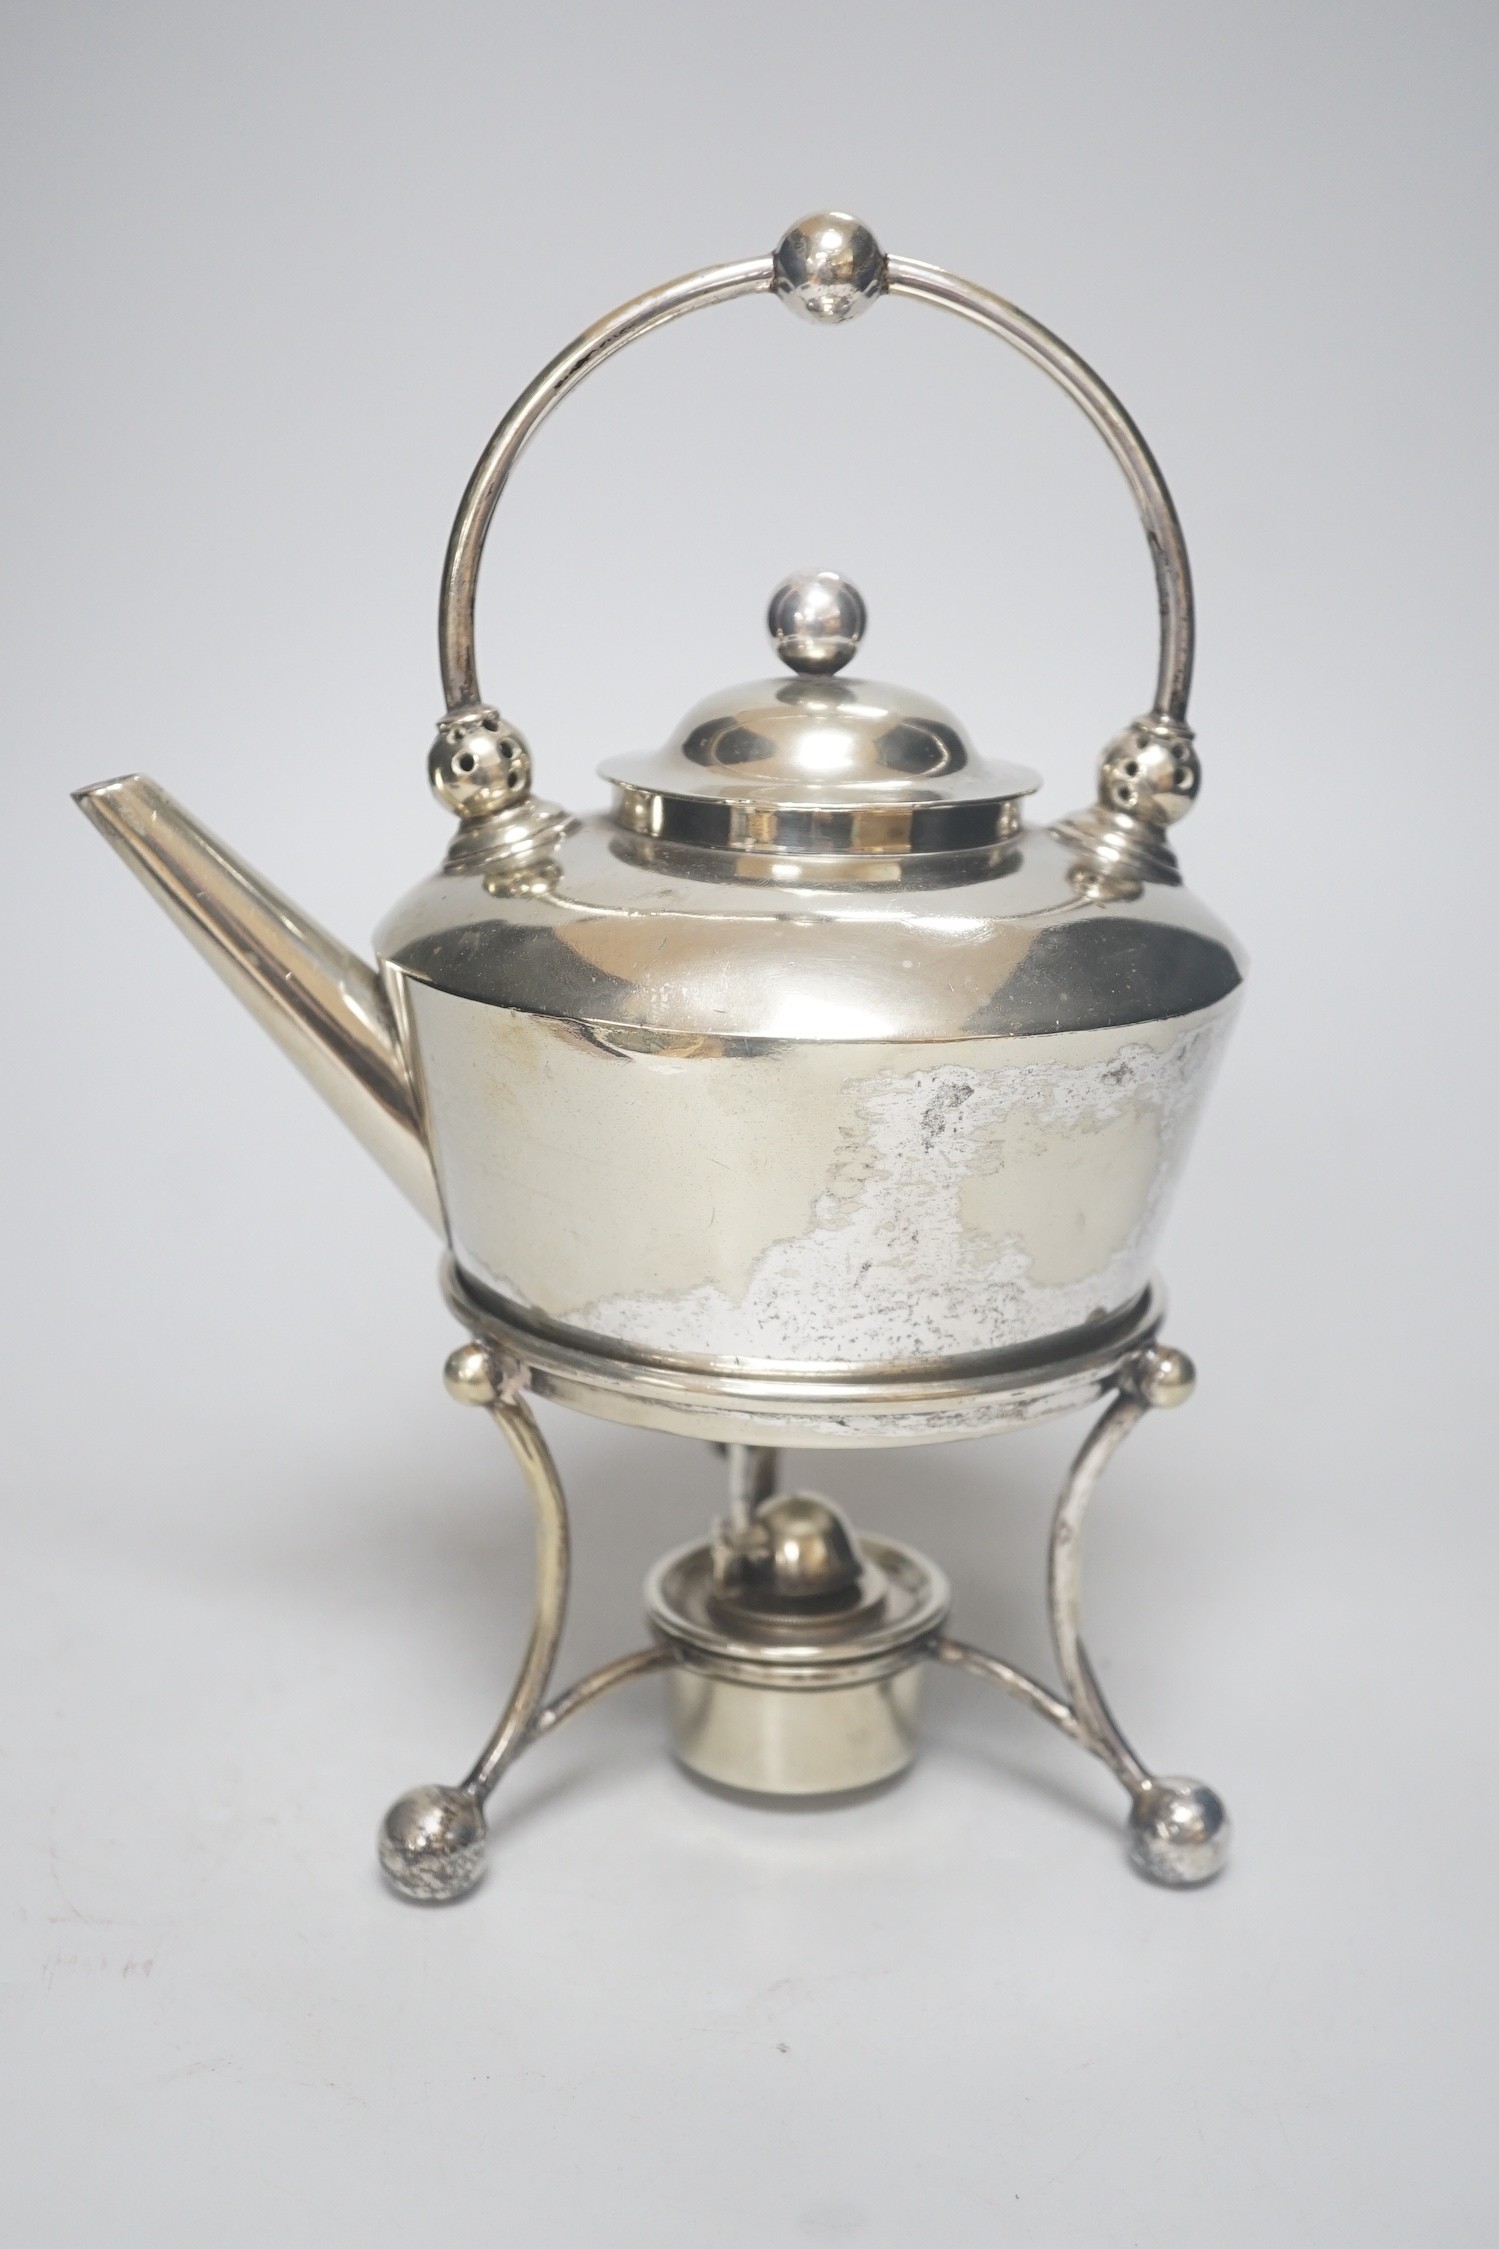 A Dresser style electroplate tea kettle, burner and stand                                                                                                                                                                   